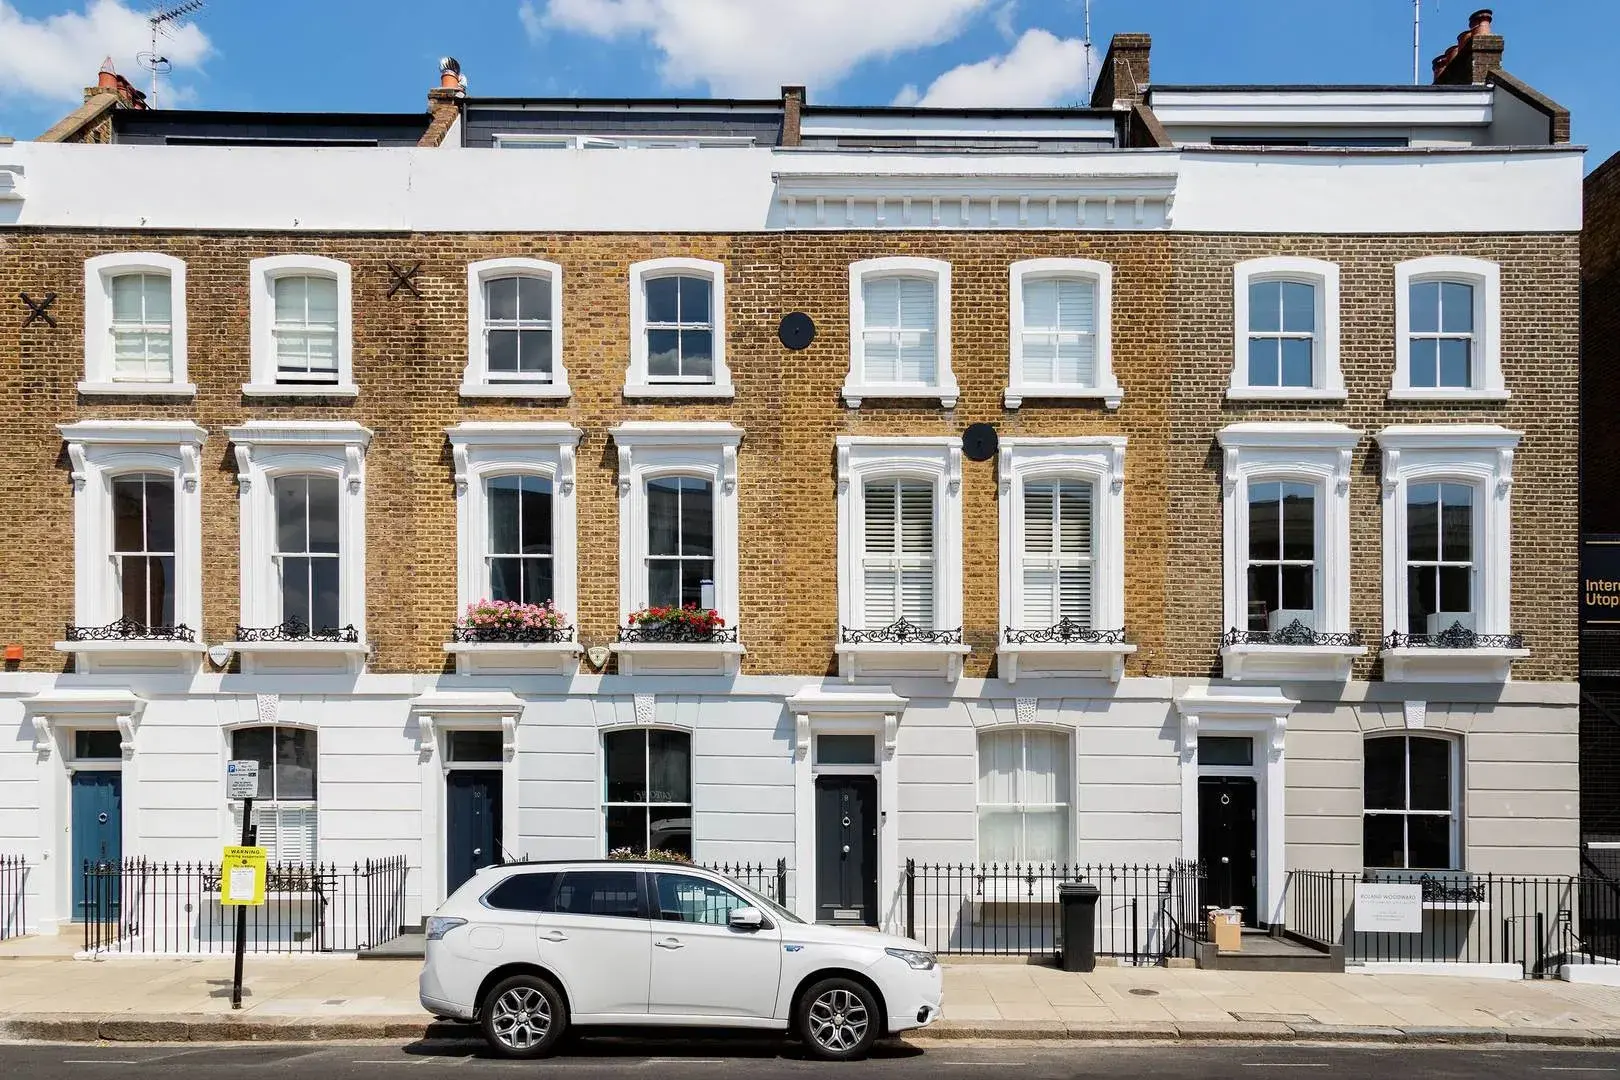 Chalcot Road II, holiday home in Primrose Hill, London